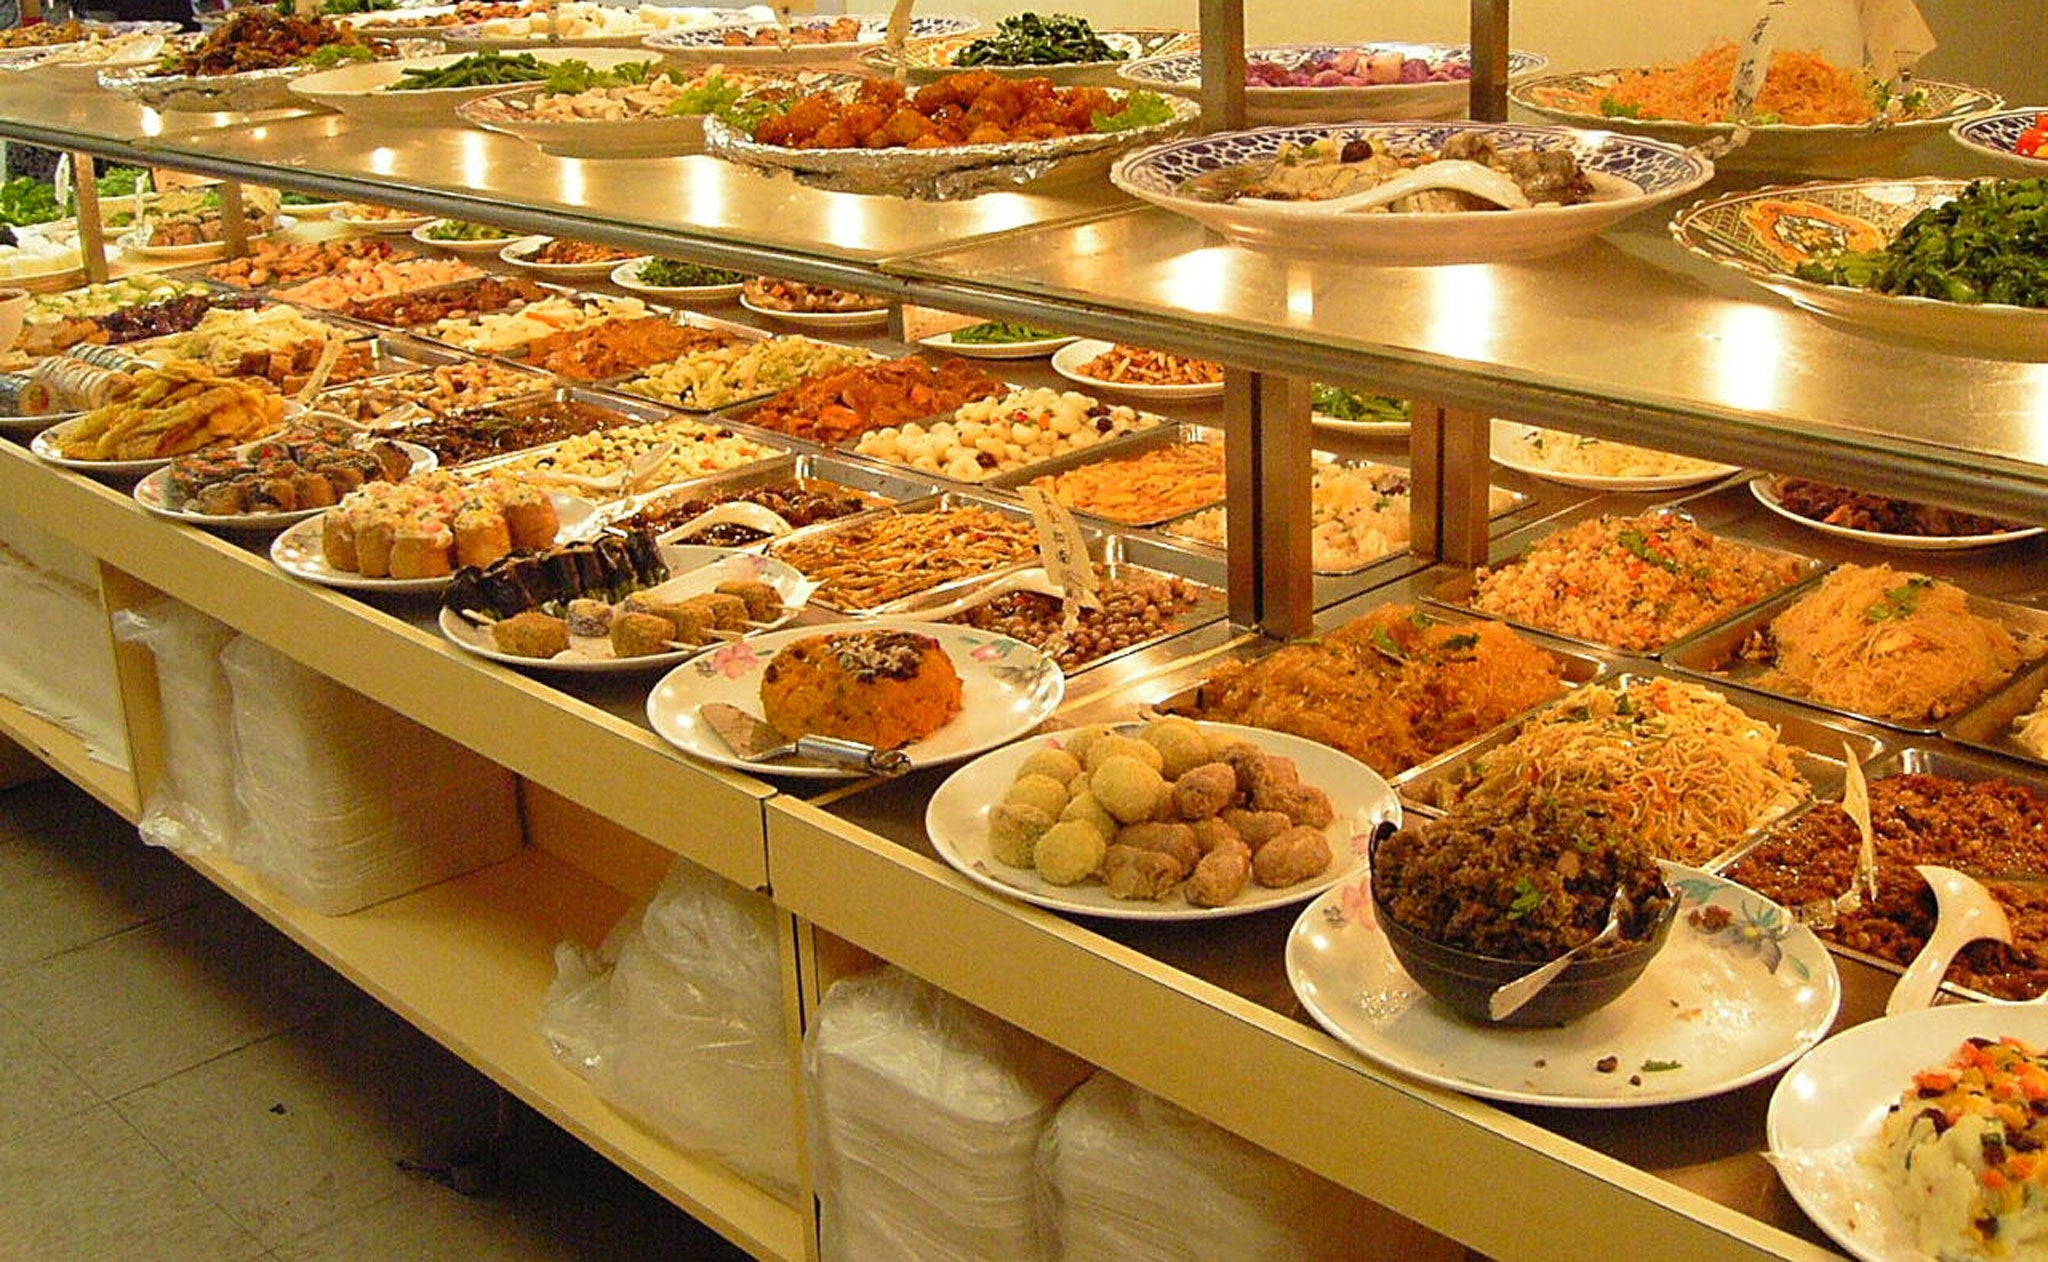 A Saudi cleric has issued a fatwa banning all-you-can-eat buffets